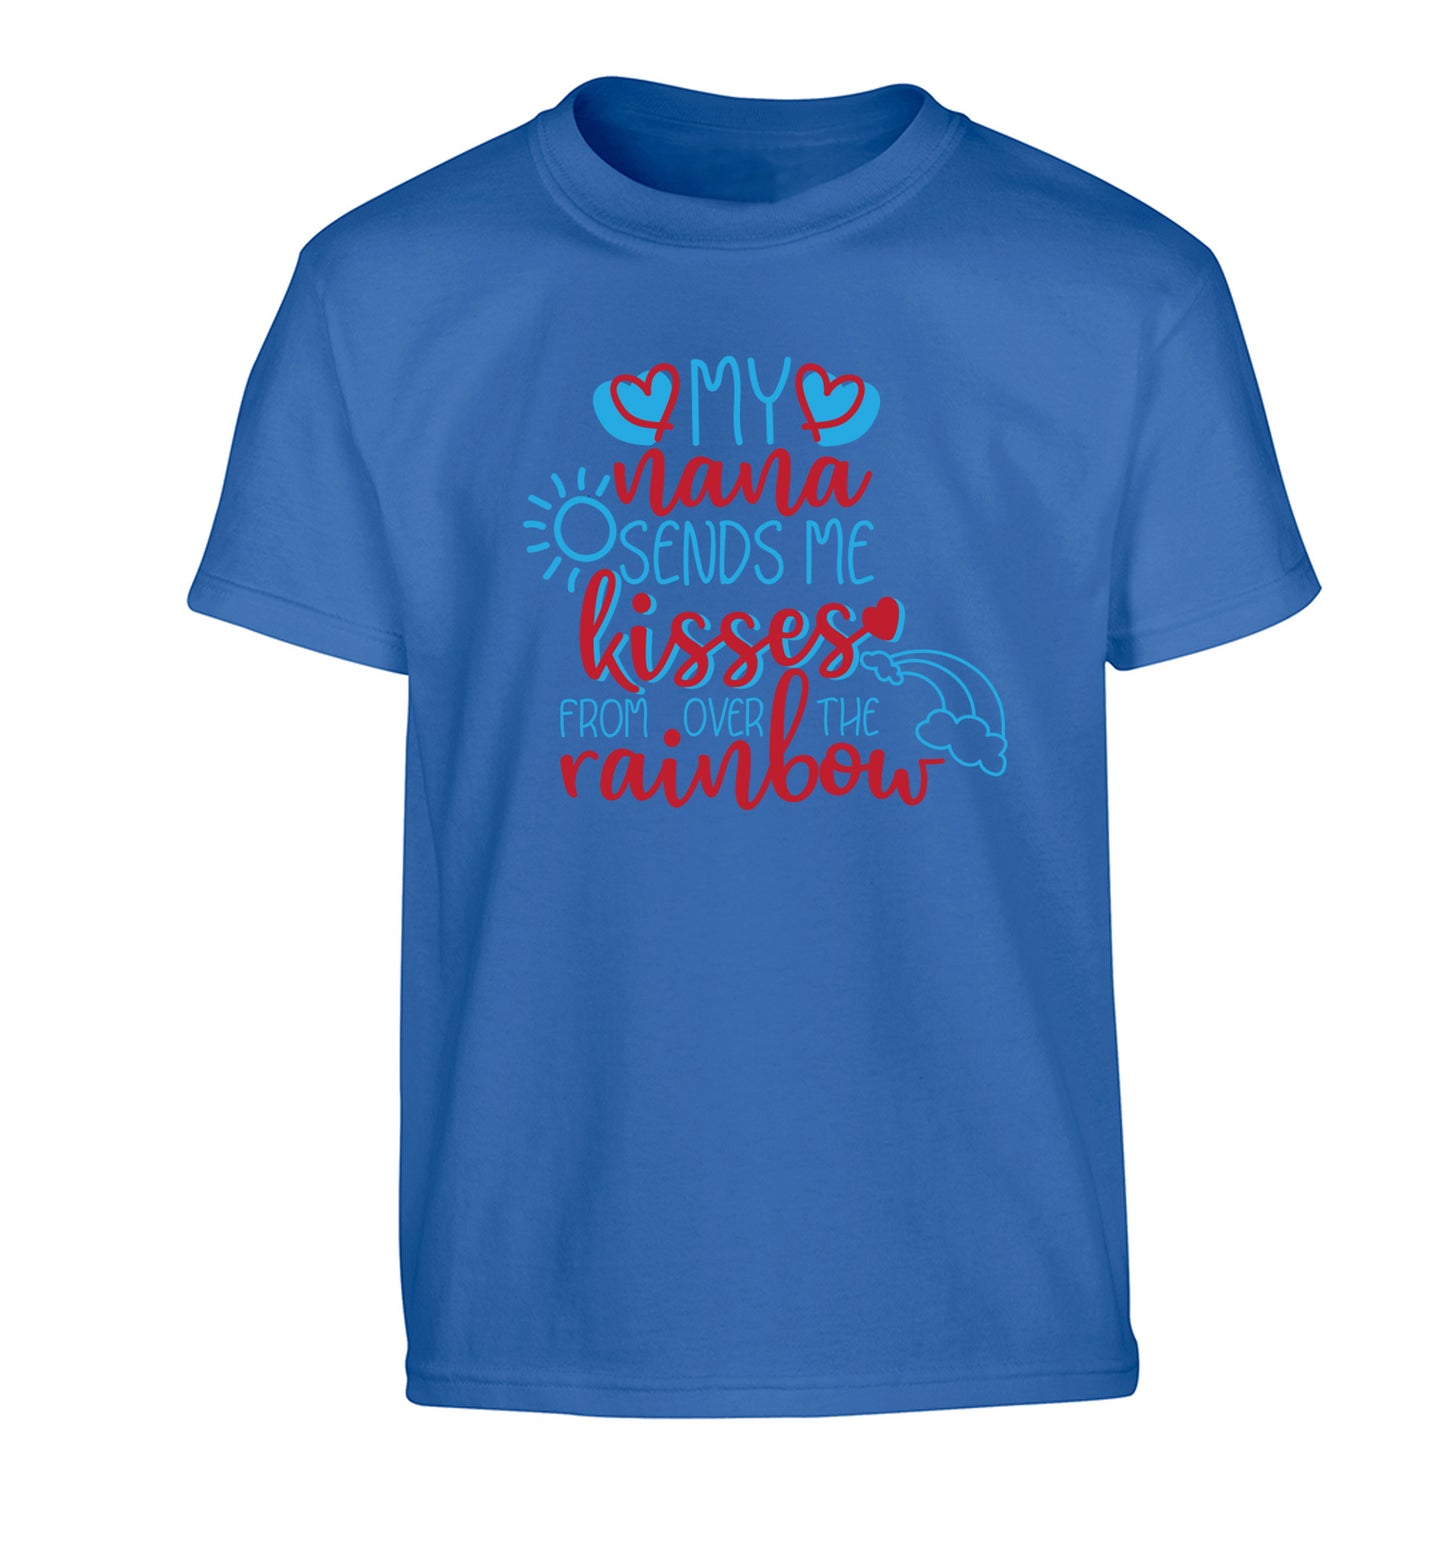 My nana sends me kisses from over the rainbow Children's blue Tshirt 12-13 Years